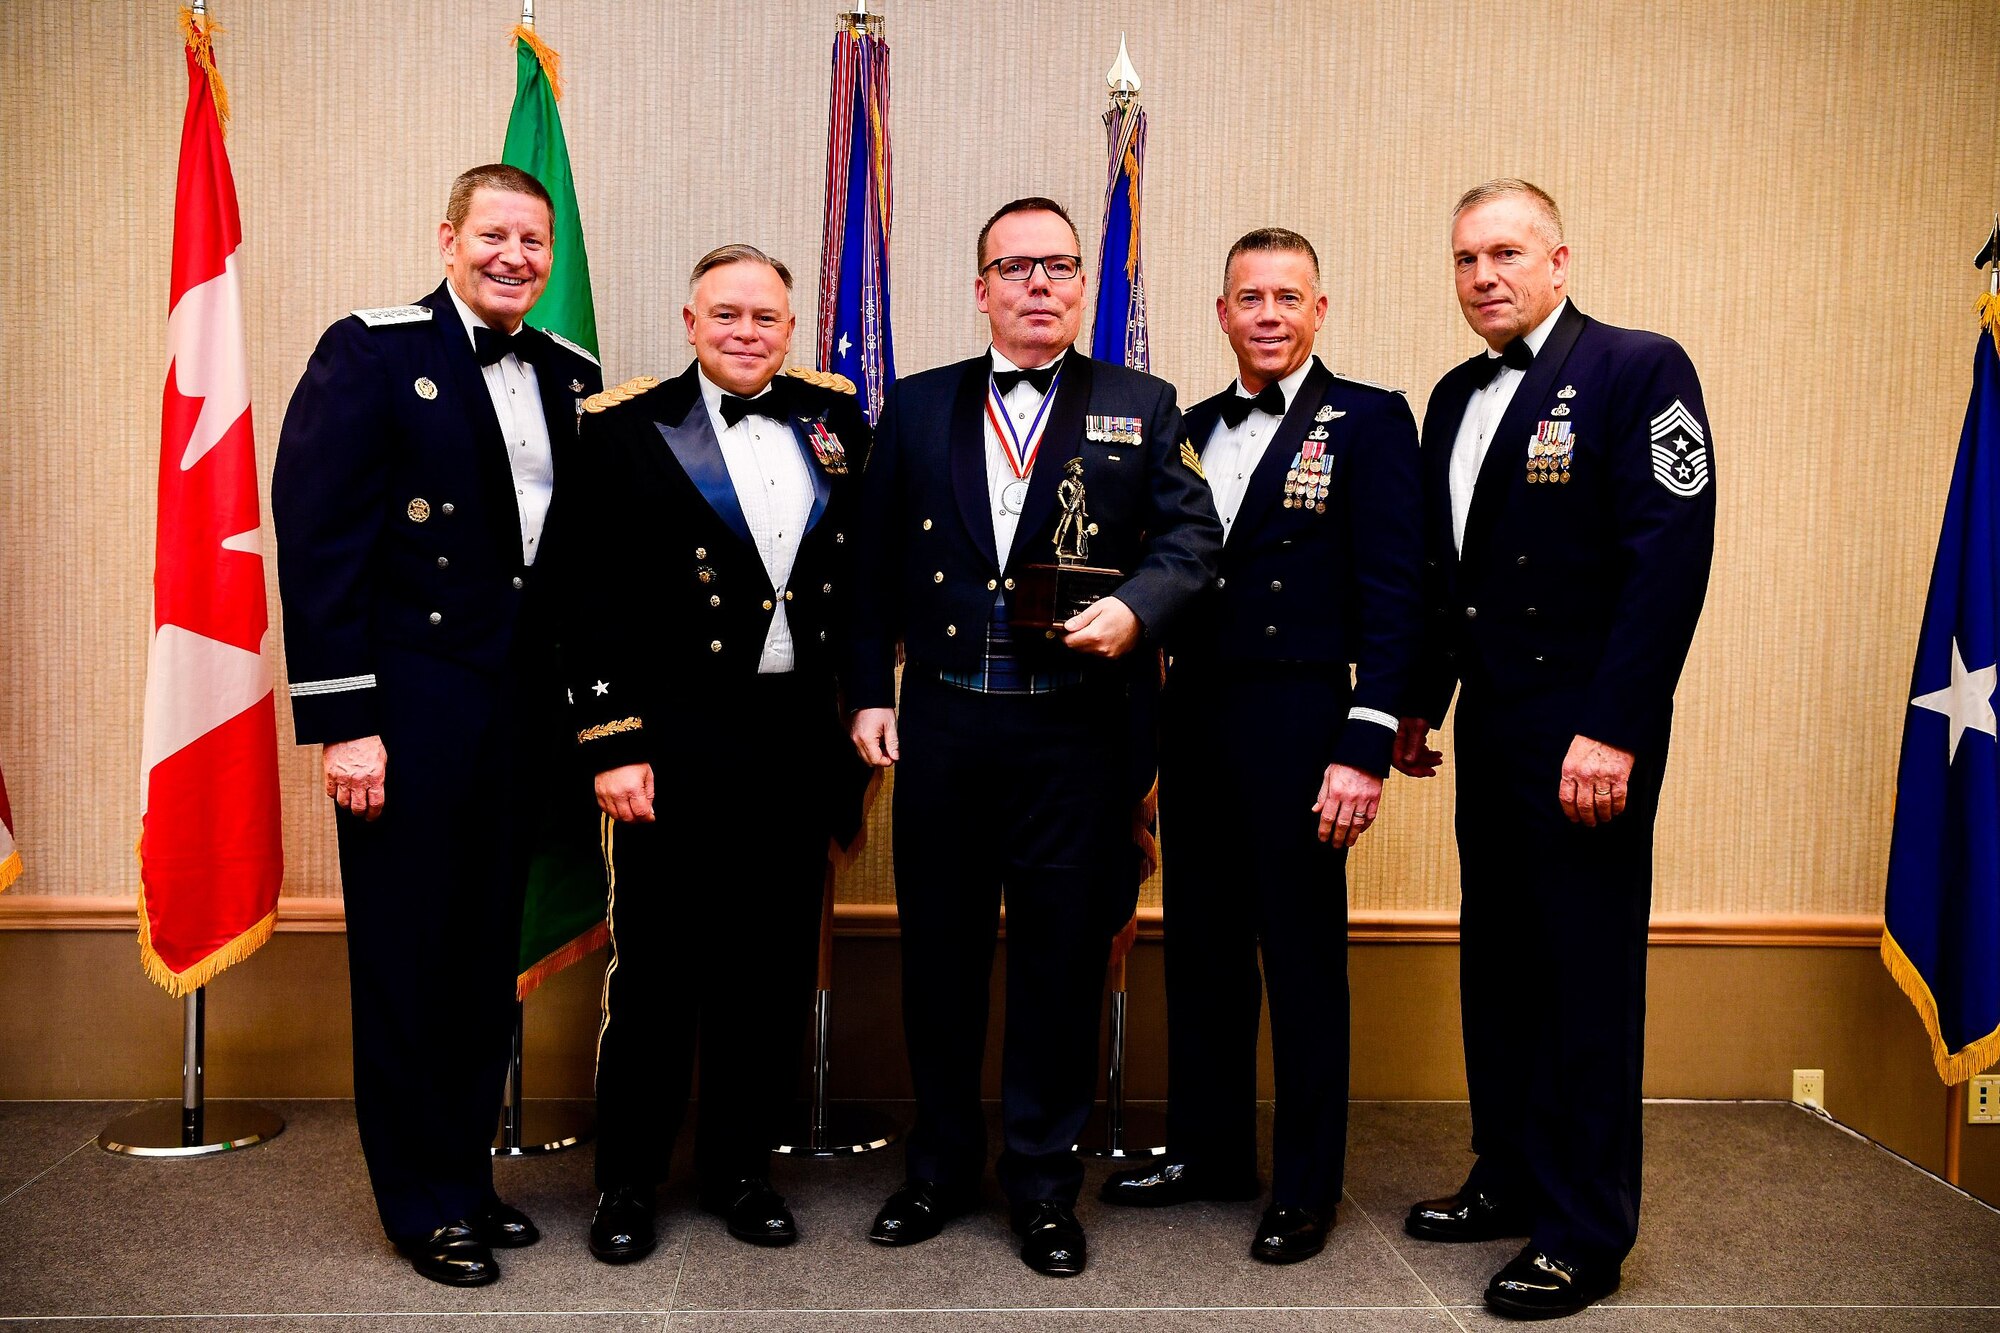 Royal Canadian Air Force Sgt. Yves Truchon, a command and control battle manager with the 225th Air Defense Squadron and Canadian Detachment, Western Air Defense Sector, is presented with the Honor Guard Manager of the Year trophy at the Washington Air National Guard’s 9th Annual Awards Banquet held at the American Lake Conference Center on Joint Base Lewis-McChord, Washington, Jan 27, 2018. Truchon was awarded the trophy for his outstanding contributions to the Washington Air National Guard over the last year.  Pictured from left to right are: Gen. Robin Rand, Air Force Global Strike Command and Air Forces Strategic-Air, U.S. Strategic Command commander, Maj. Gen. Bret Daugherty, Adjutant General of the Washington National Guard, Truchon, Brig. Gen. Jeremy Horn, commander of the Washington Air National Guard, and Chief Master Sgt. Max Tidwell, Washington Air National Guard command chief. (U.S. Air National Guard photo by Tech. Sgt. Timothy Chacon)